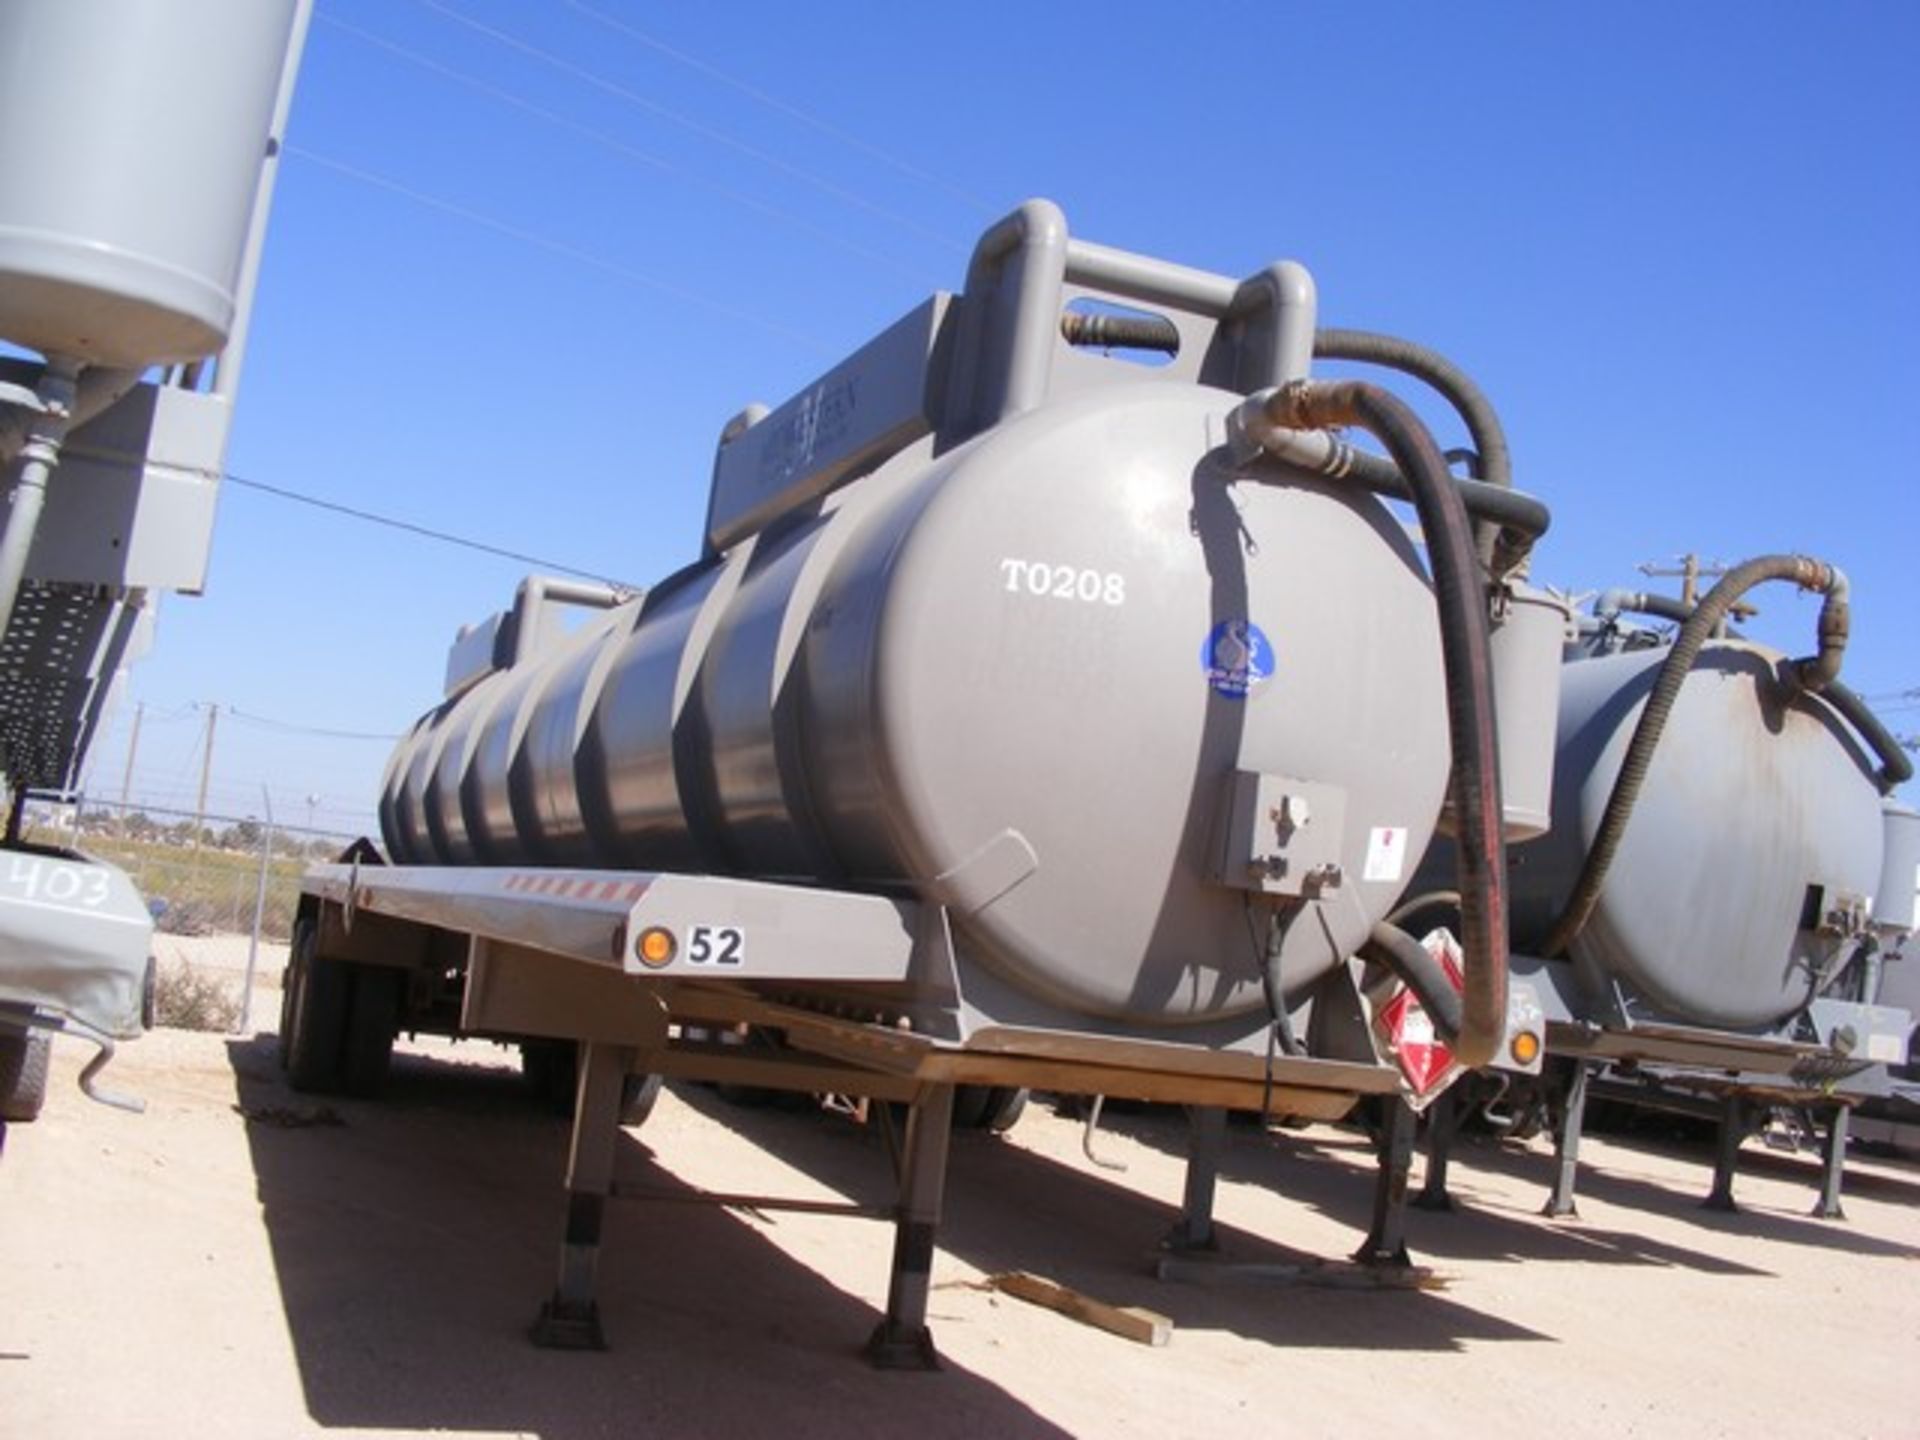 Located in YARD 1 - Midland, TX (402) (X) 2008 DRAGON 130 BBL T/A VAC TRAILER, VIN- - Image 2 of 4